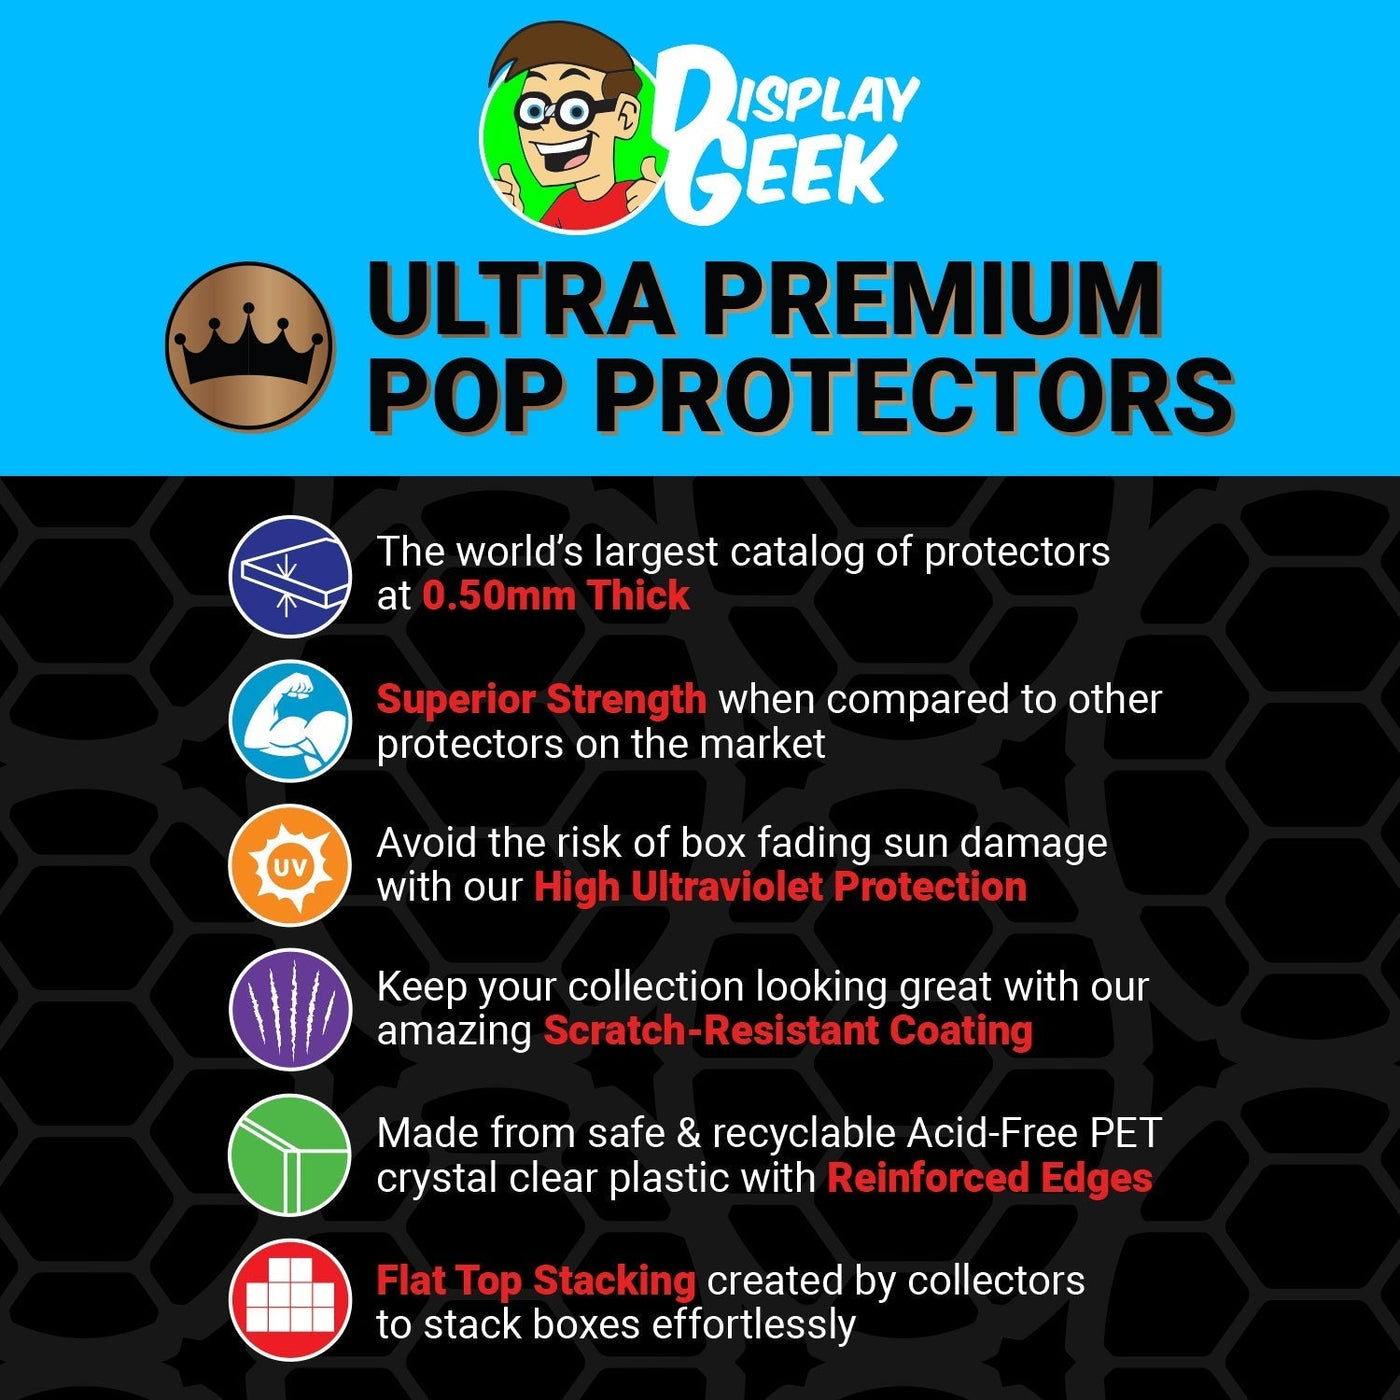 Pop Protector for 2 Pack Minnie & Mickey Valentine Funko Pop on The Protector Guide App by Display Geek